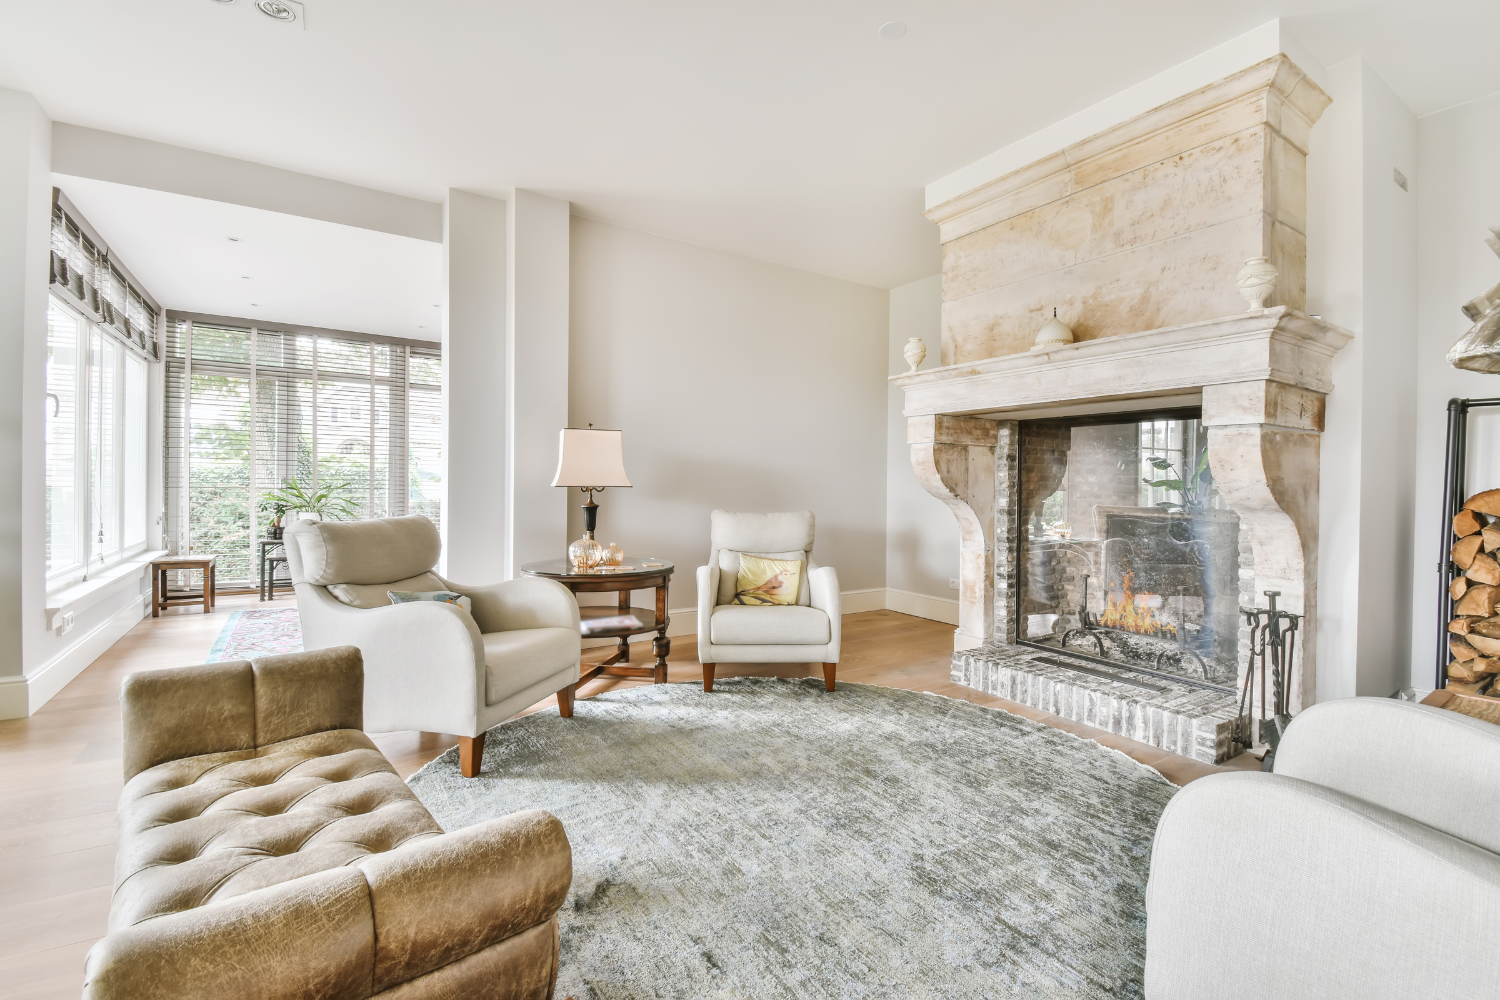 pamela-sandall-design-pasadena-ca-reupholster-or-buy-new-traditional-living-room-with-large-stone-fireplace